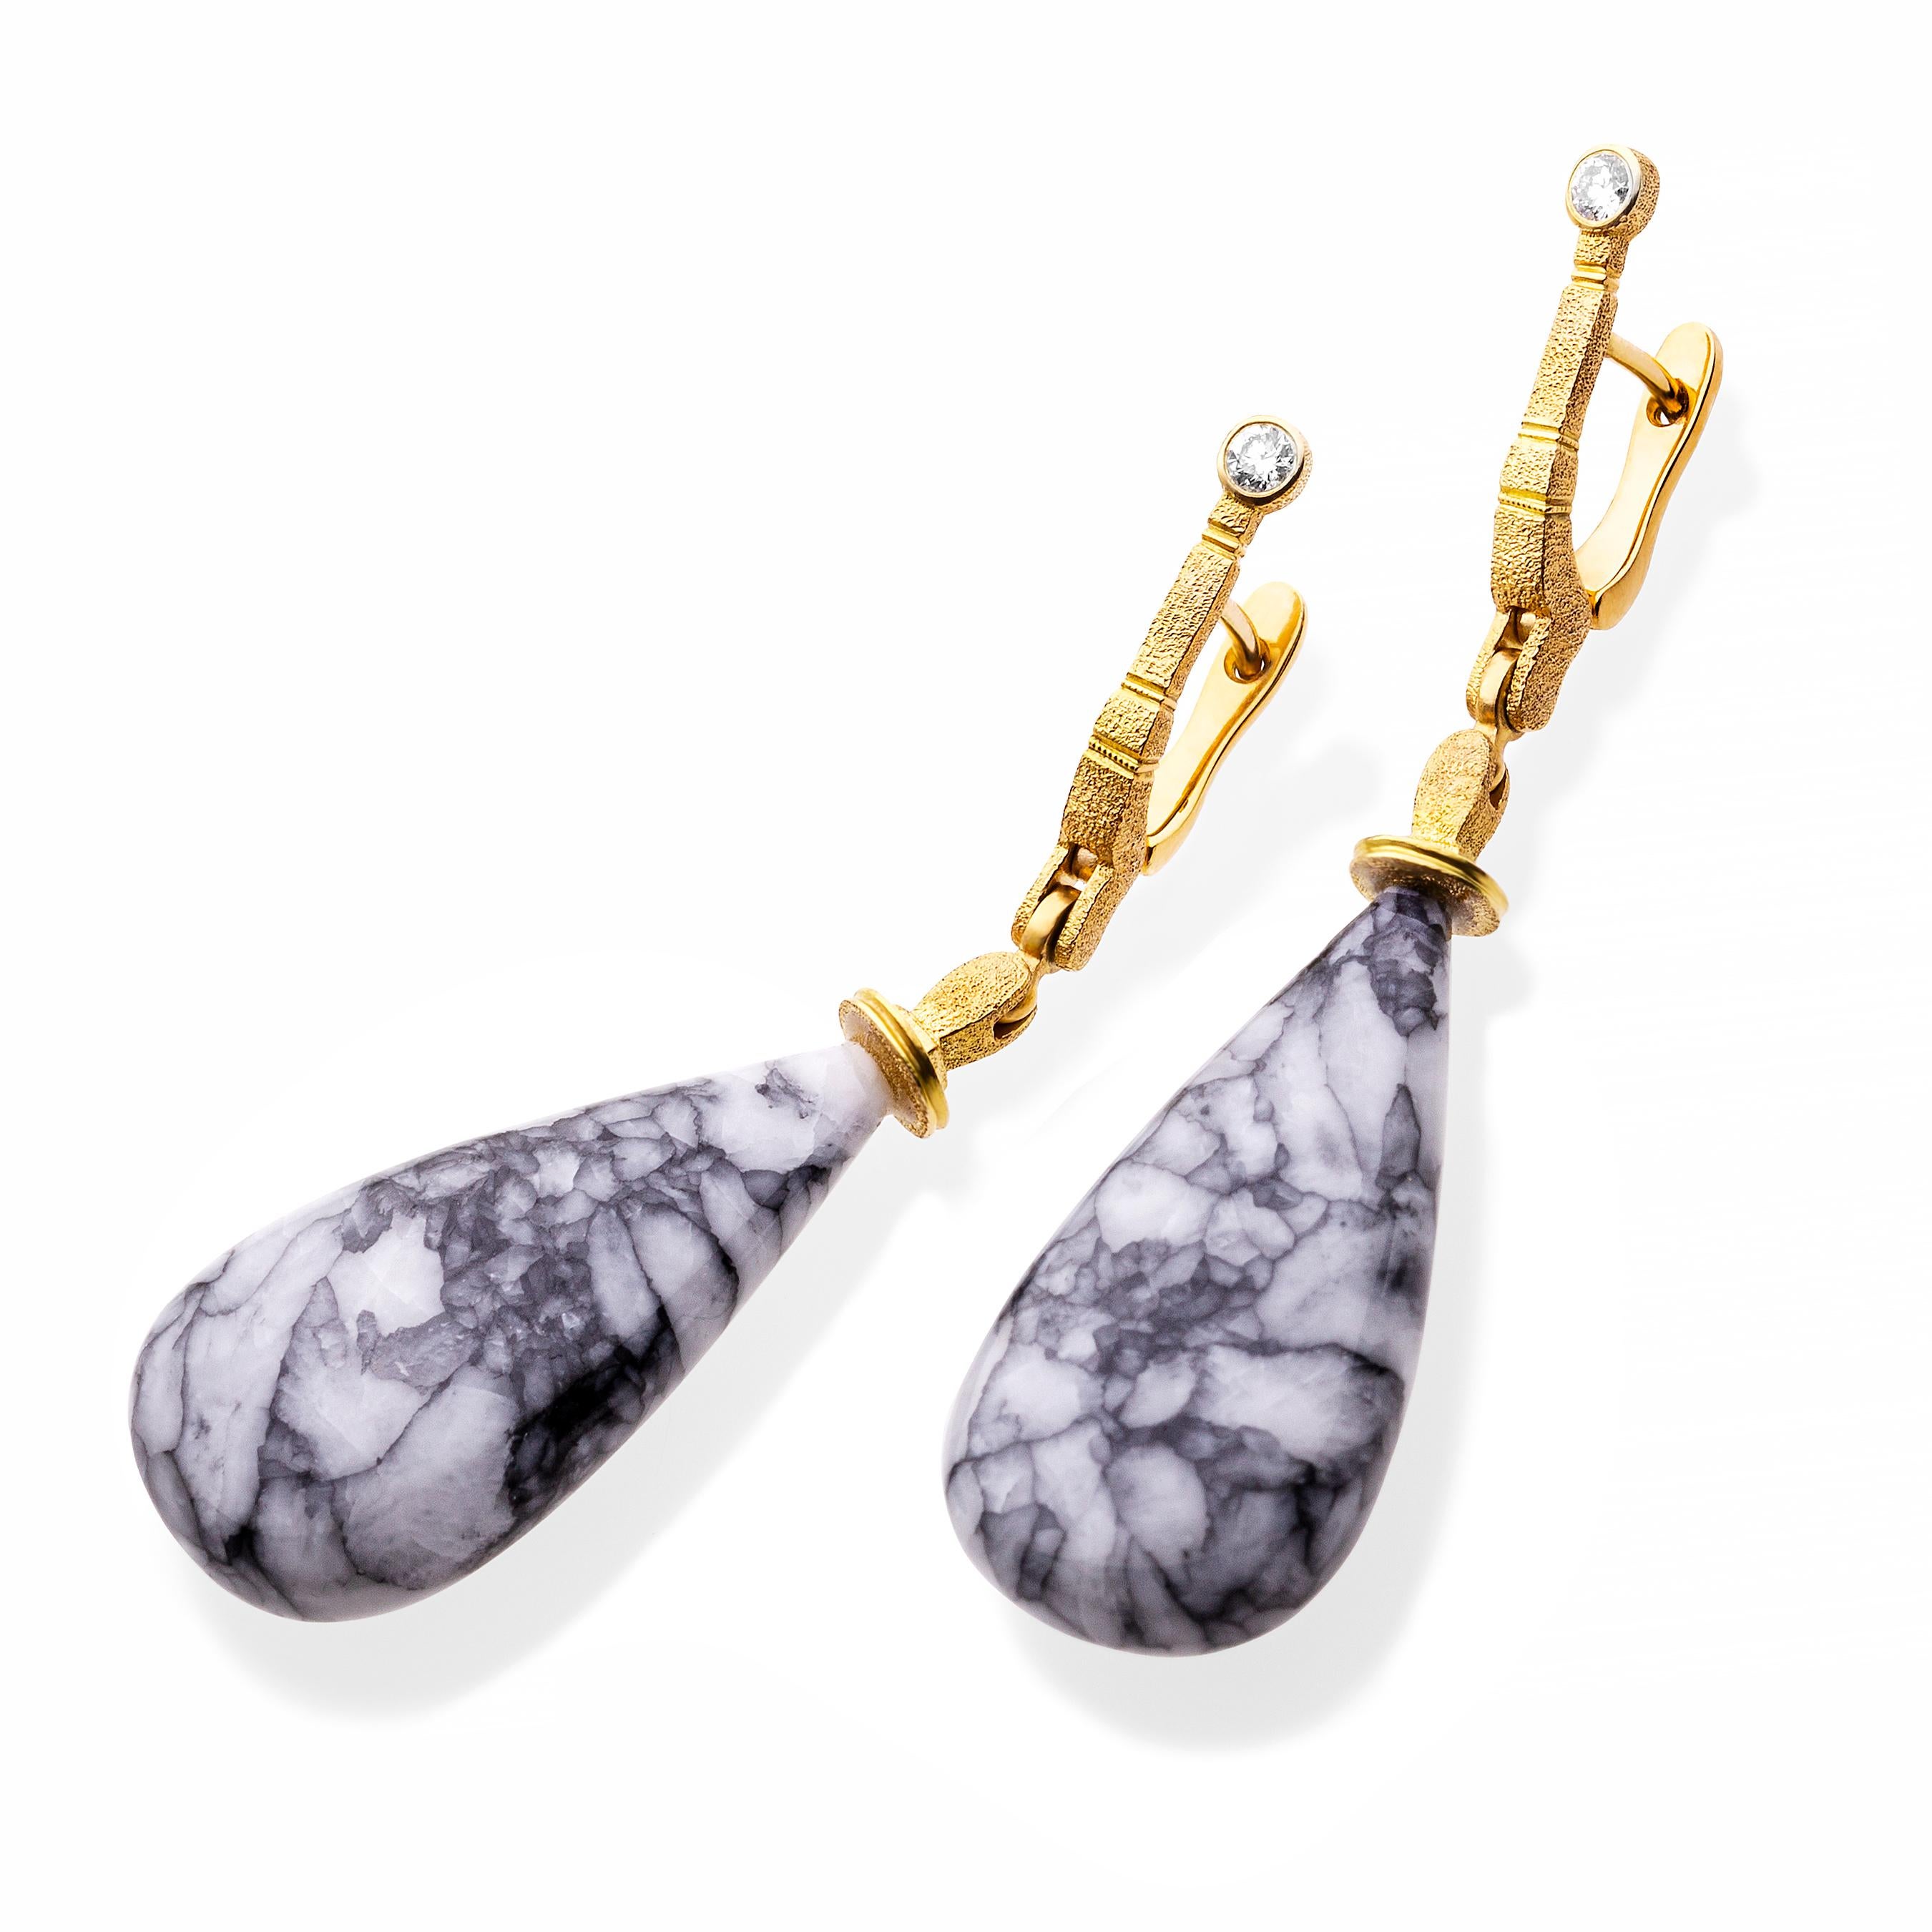 Contemporary Alex Sepkus 18 Karat Yellow Gold Sticks and Stones Earrings with Pinolite Drops For Sale